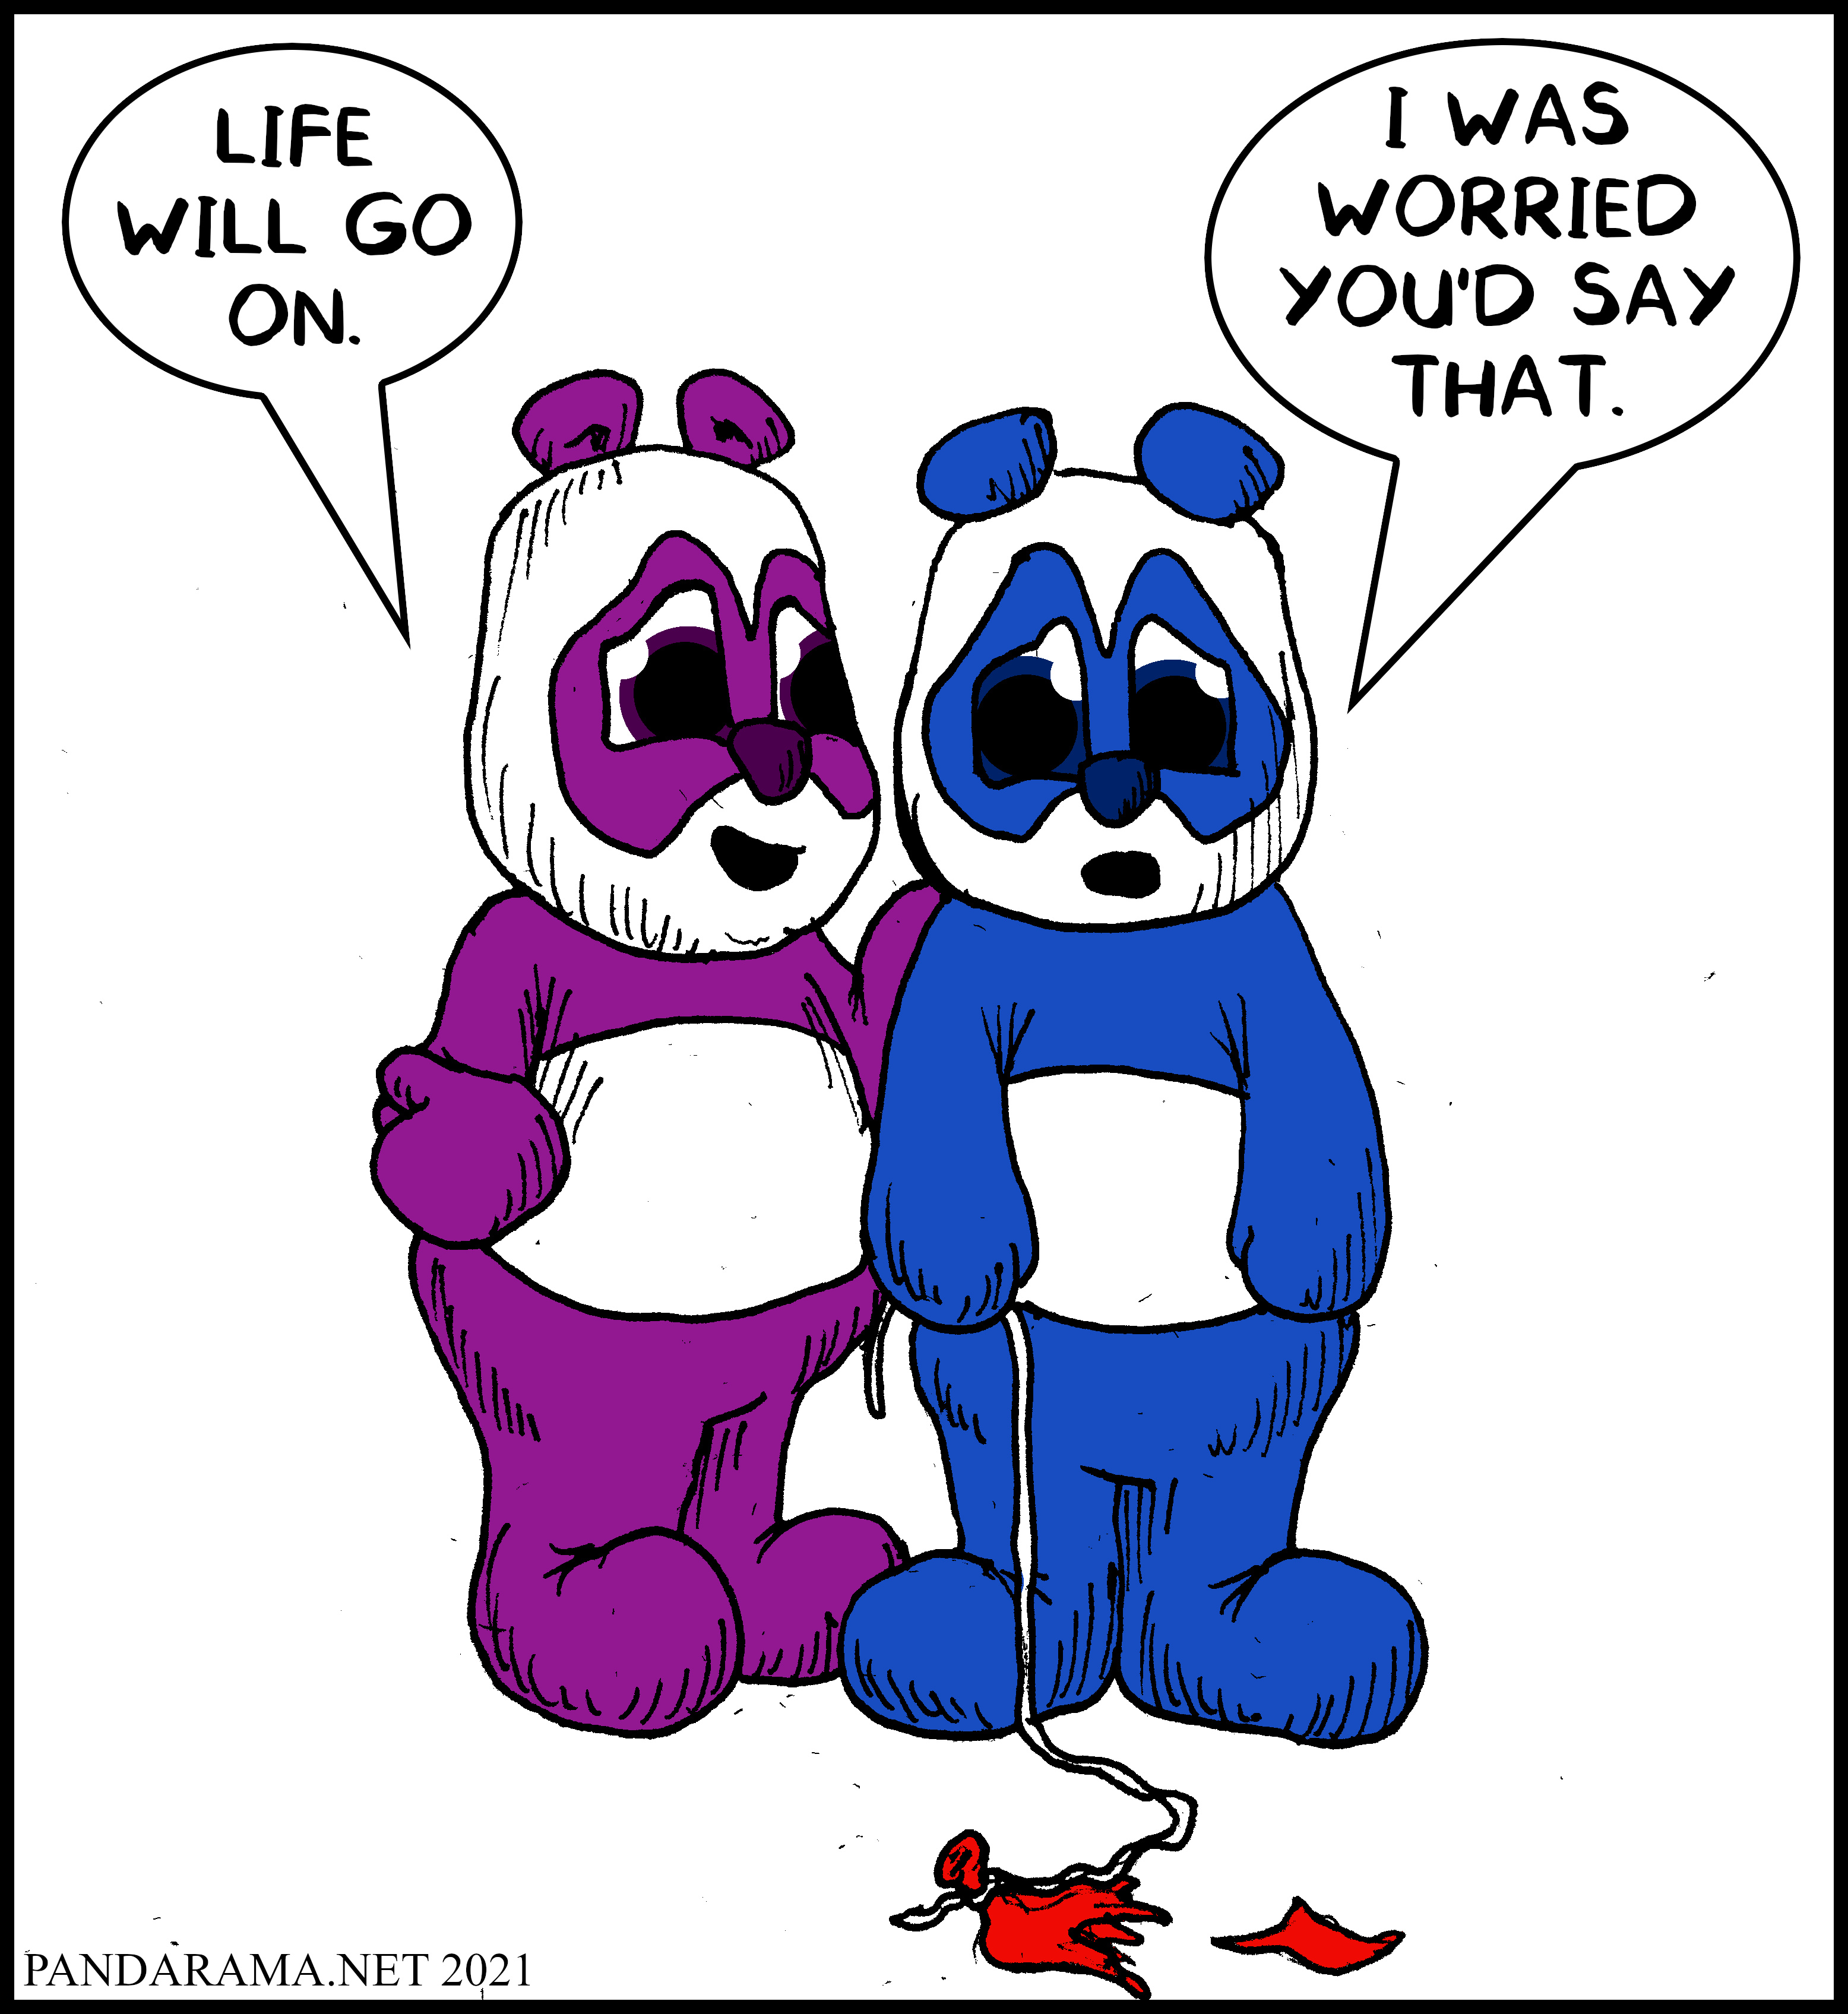 webcomic. panda with popped balloon. Life goes on. I was afraid you'd say that.